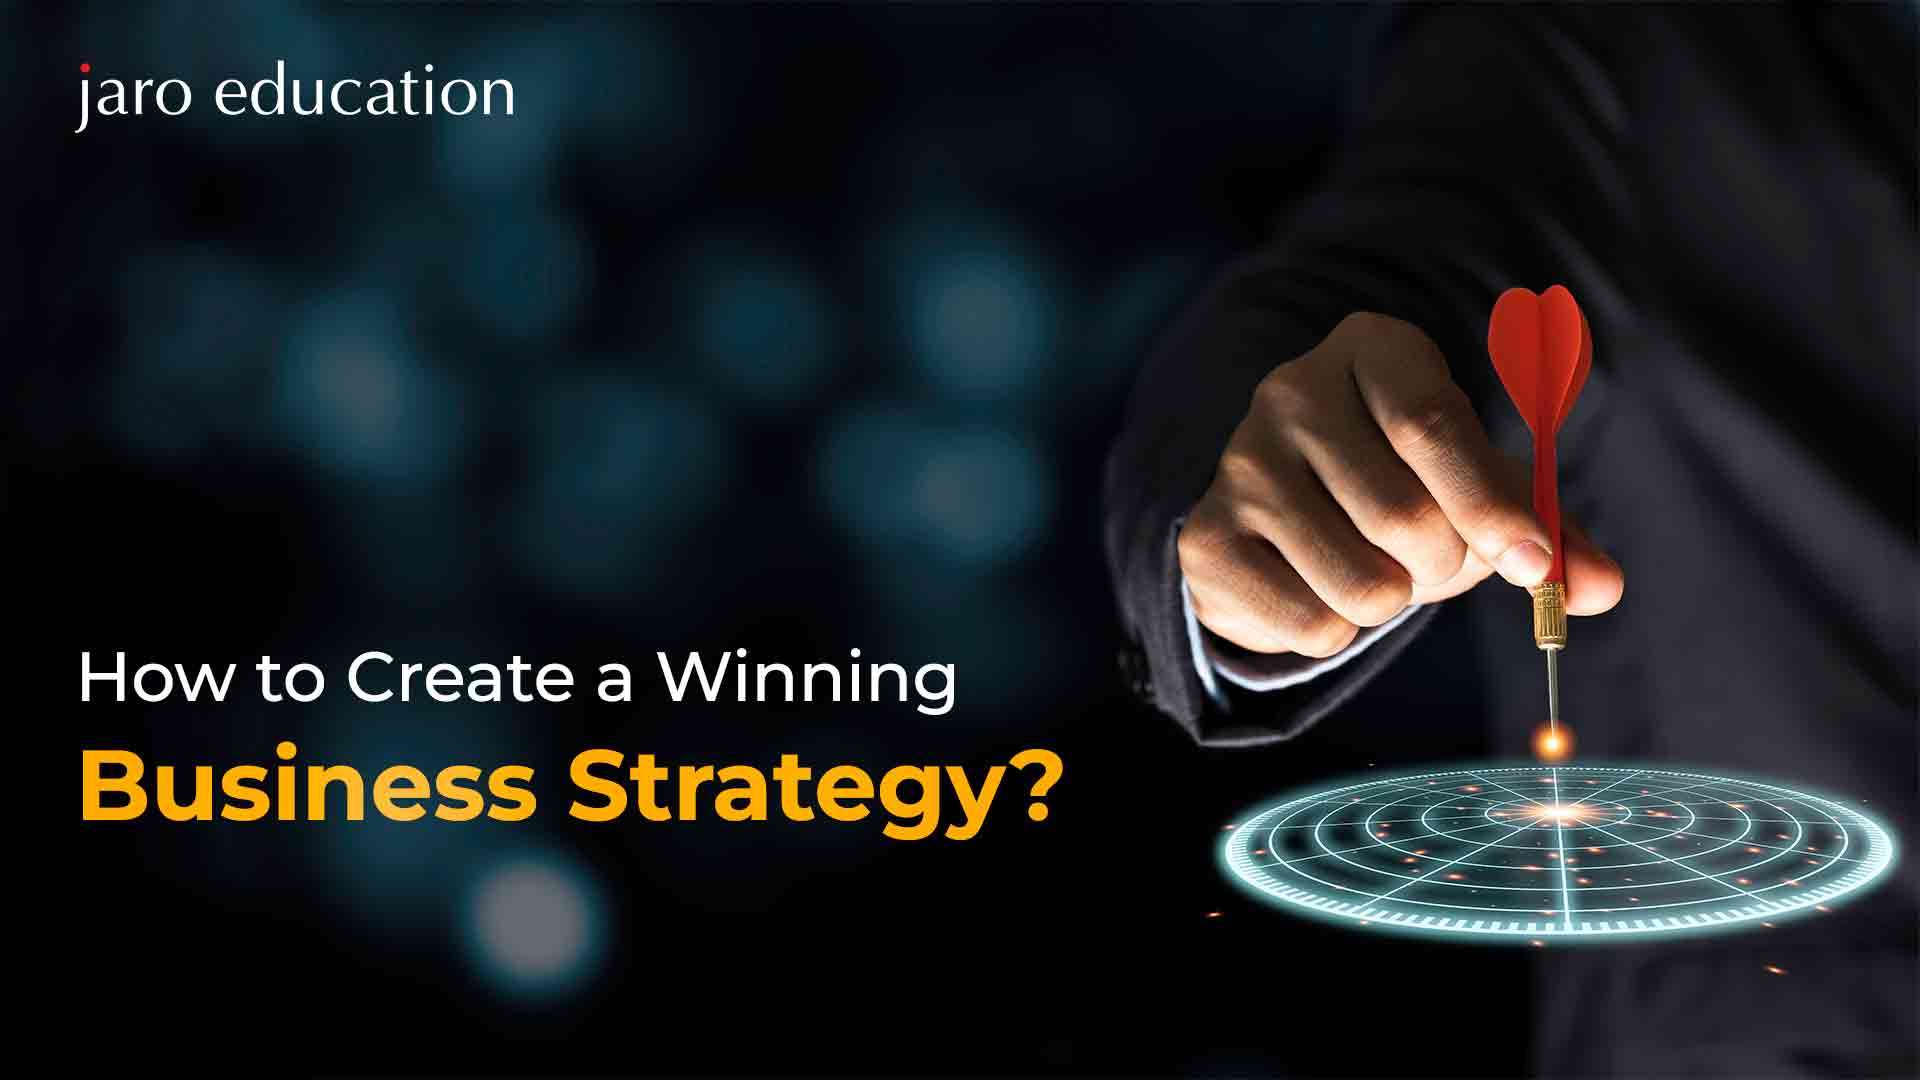 How-to-Create-a-Winning-Business-Strategy jaro